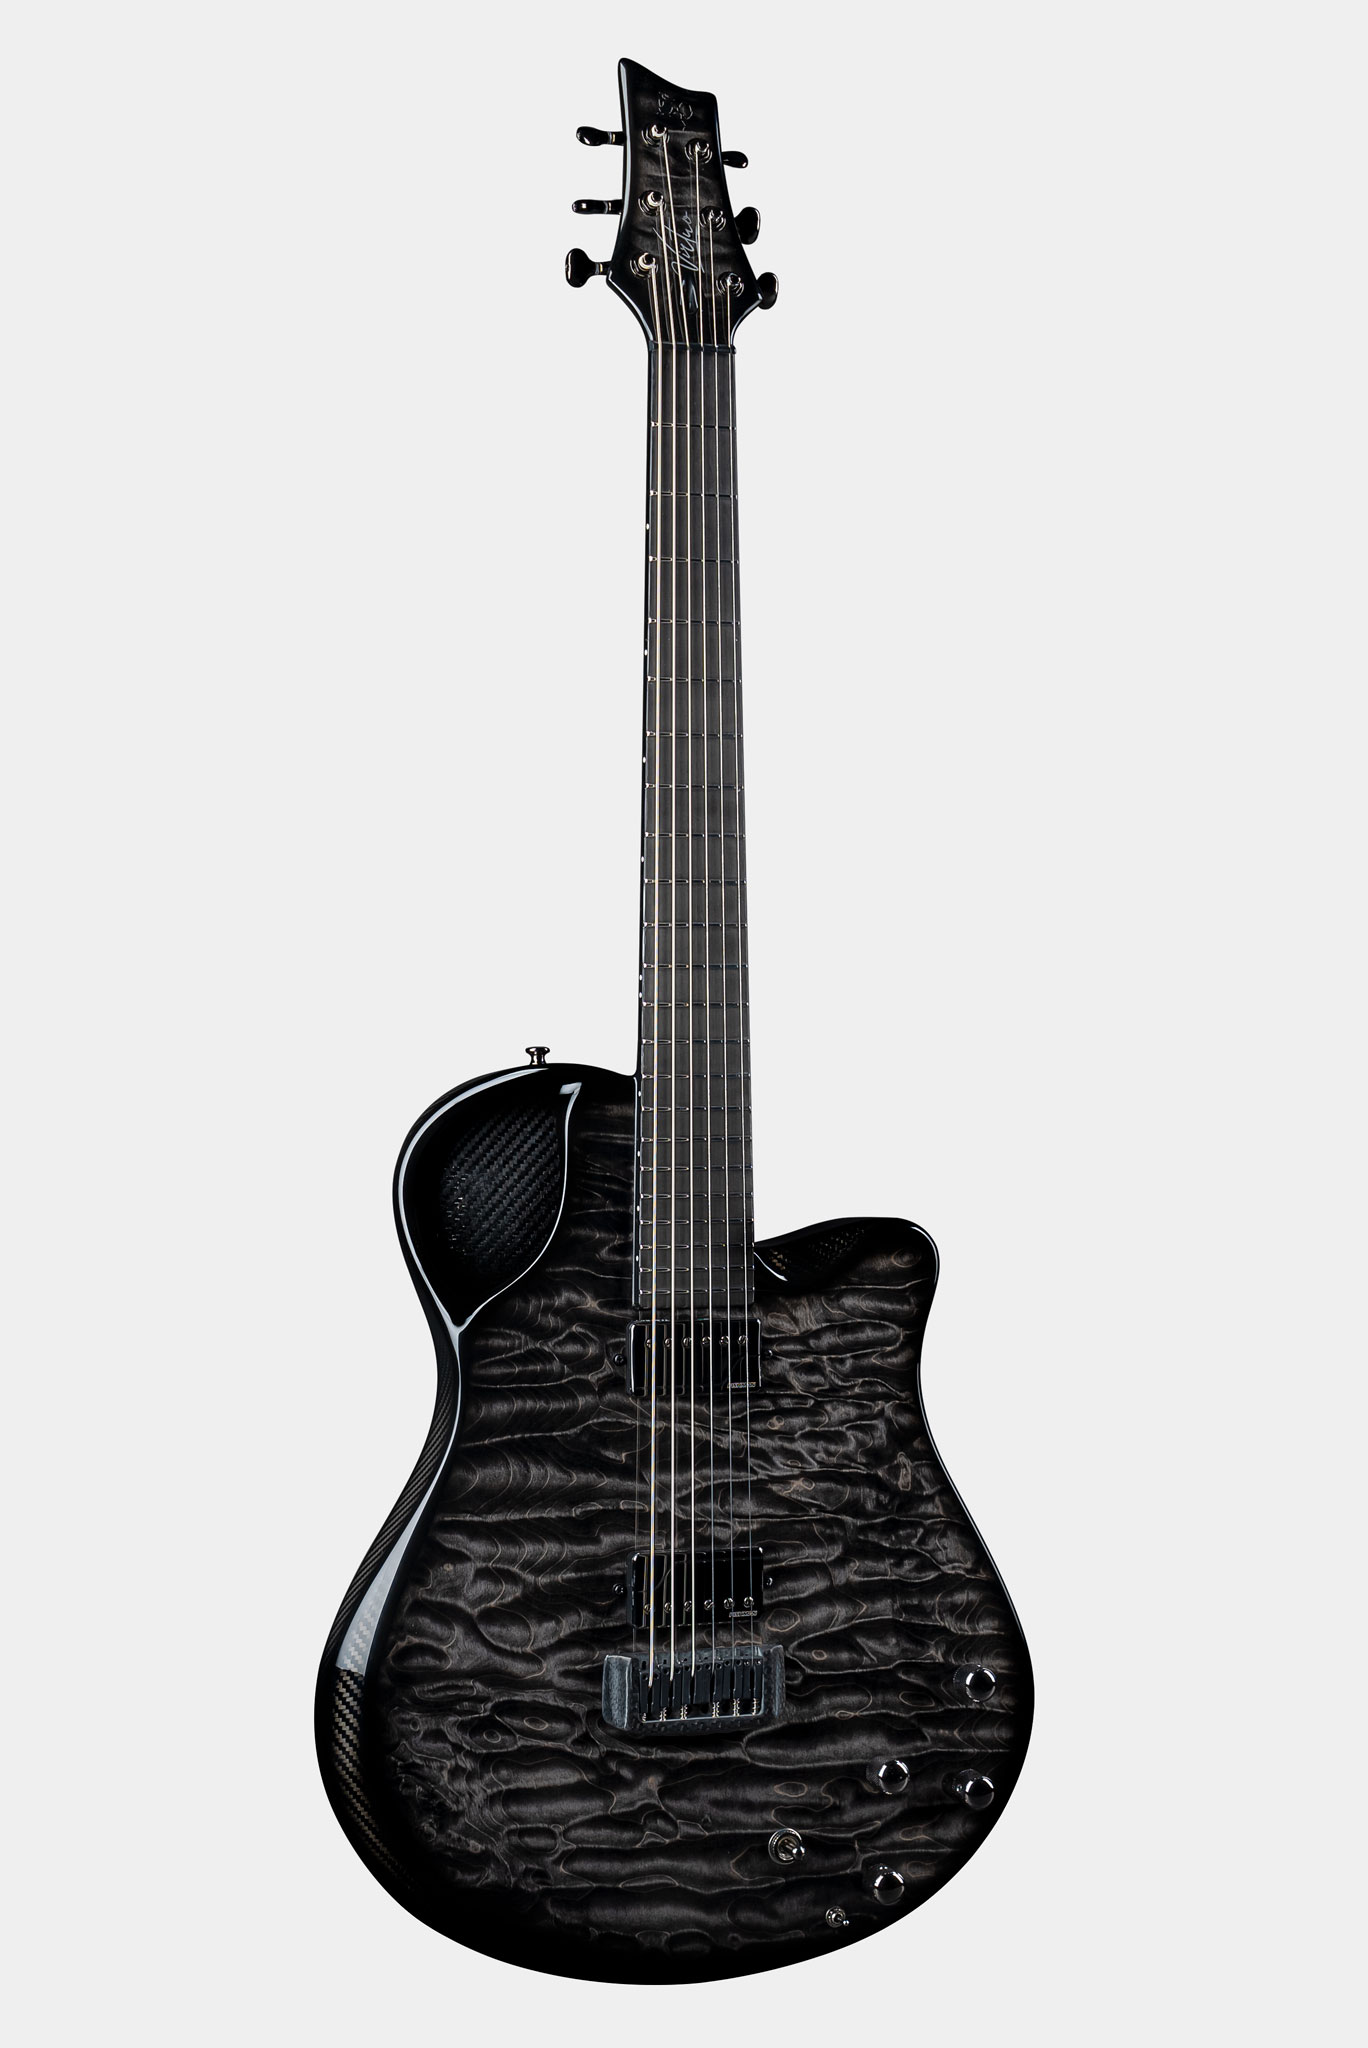 Emerald Guitars Virtuo model in Quilted Maple Black